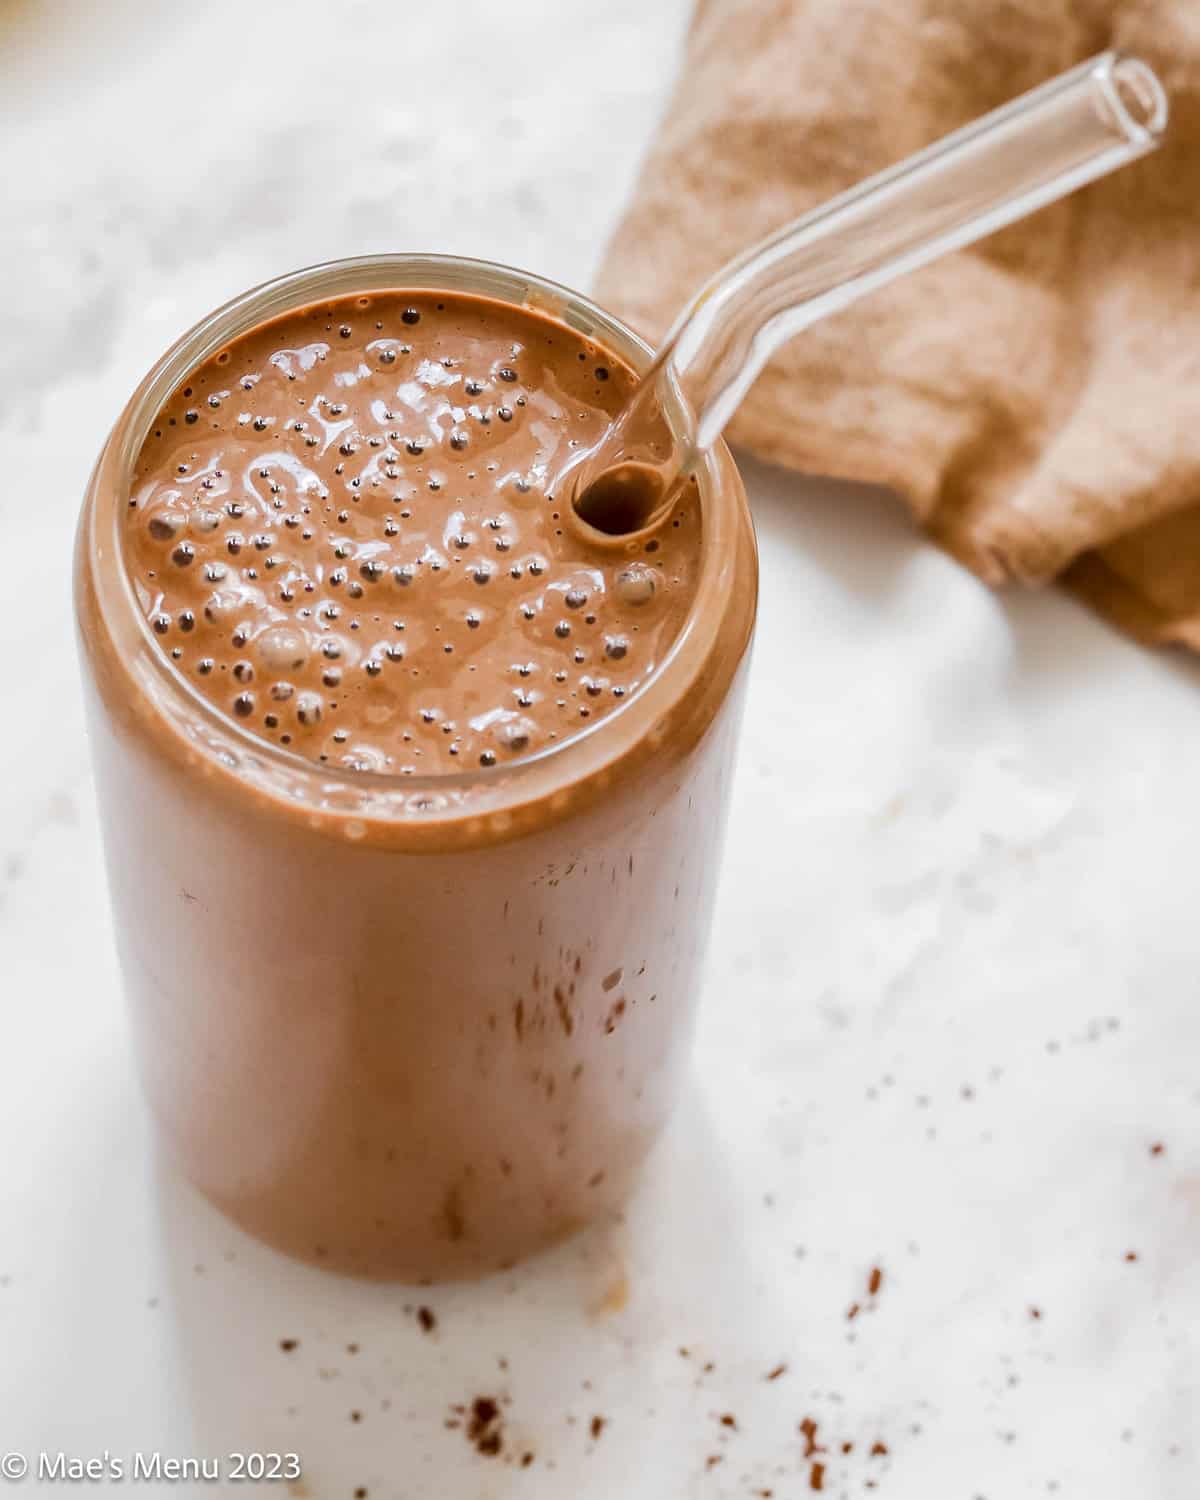 An up-close shot of a glass of mocha protein shakes with a glass straw.